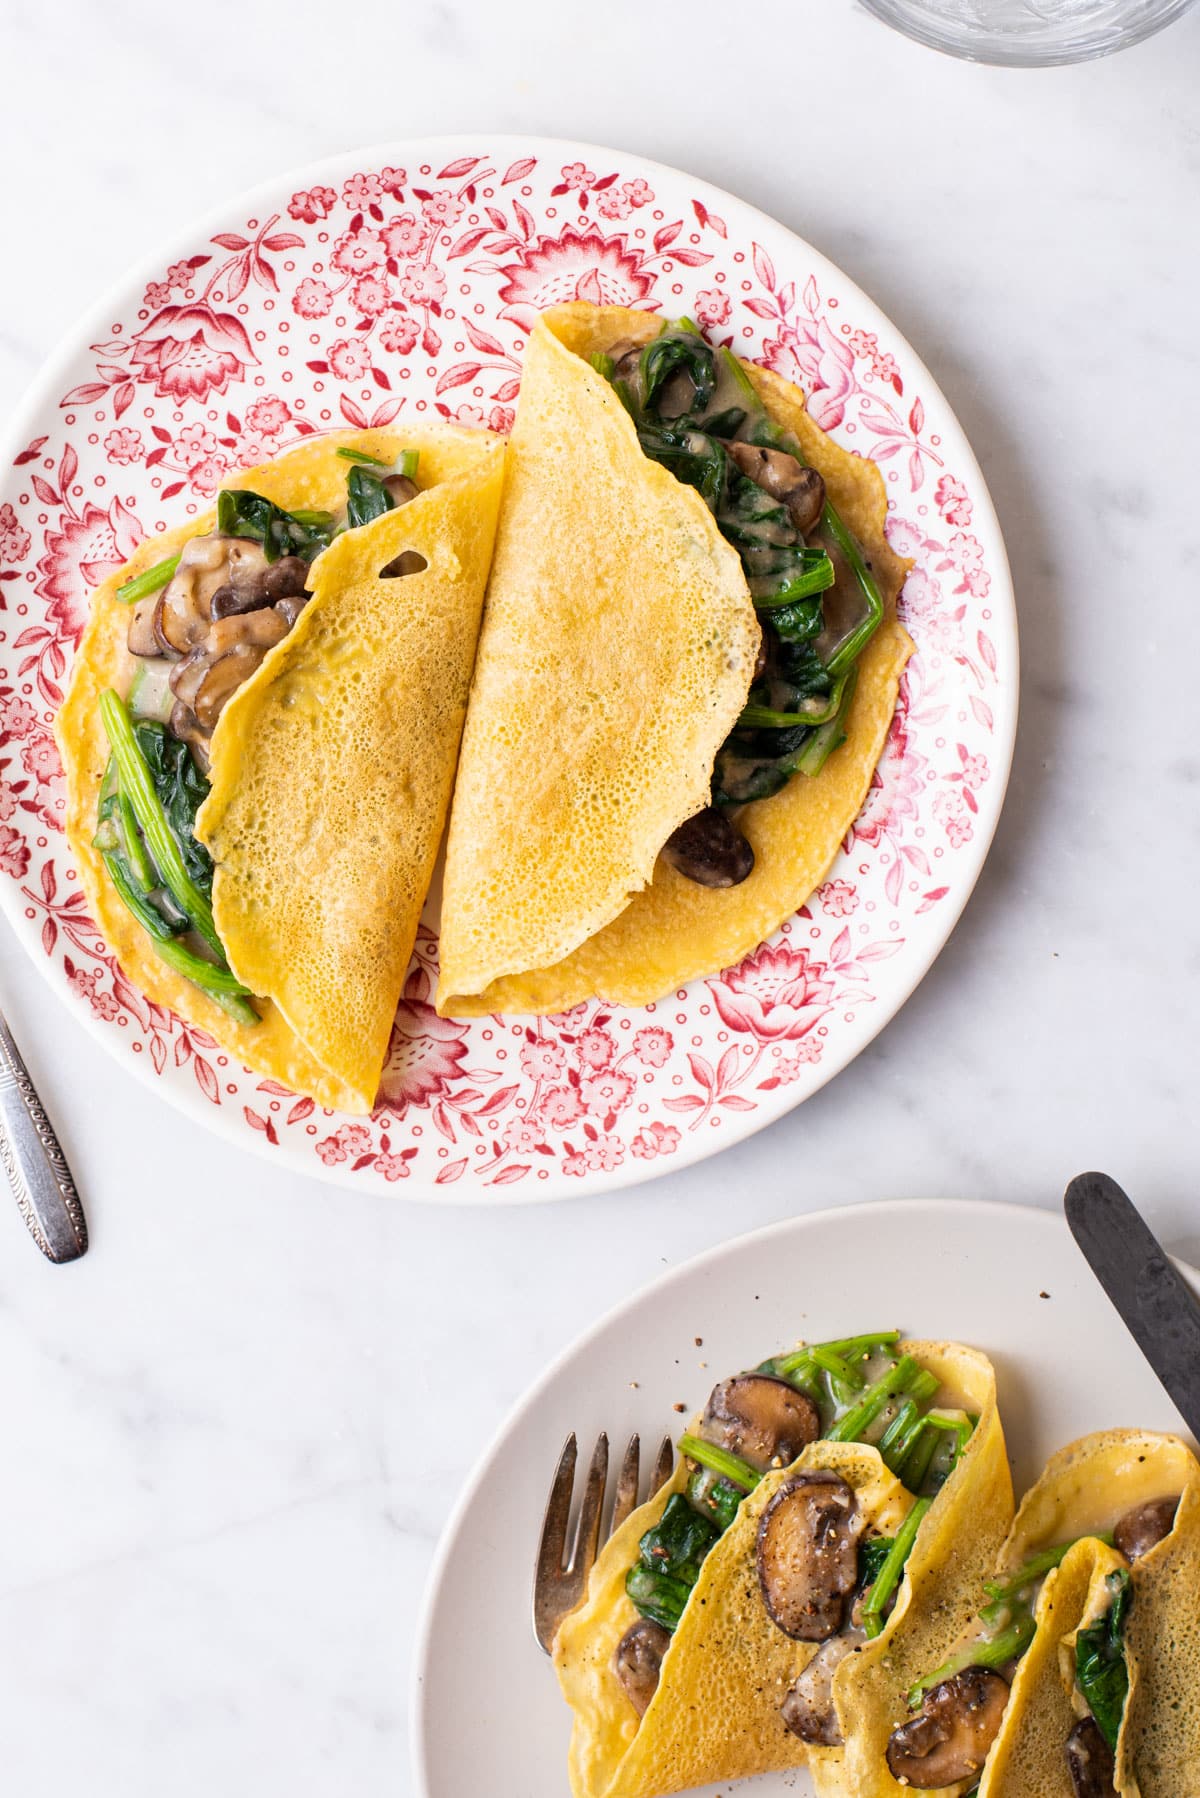 Savory vegan chickpea crepes with mushroom-spinach filling.